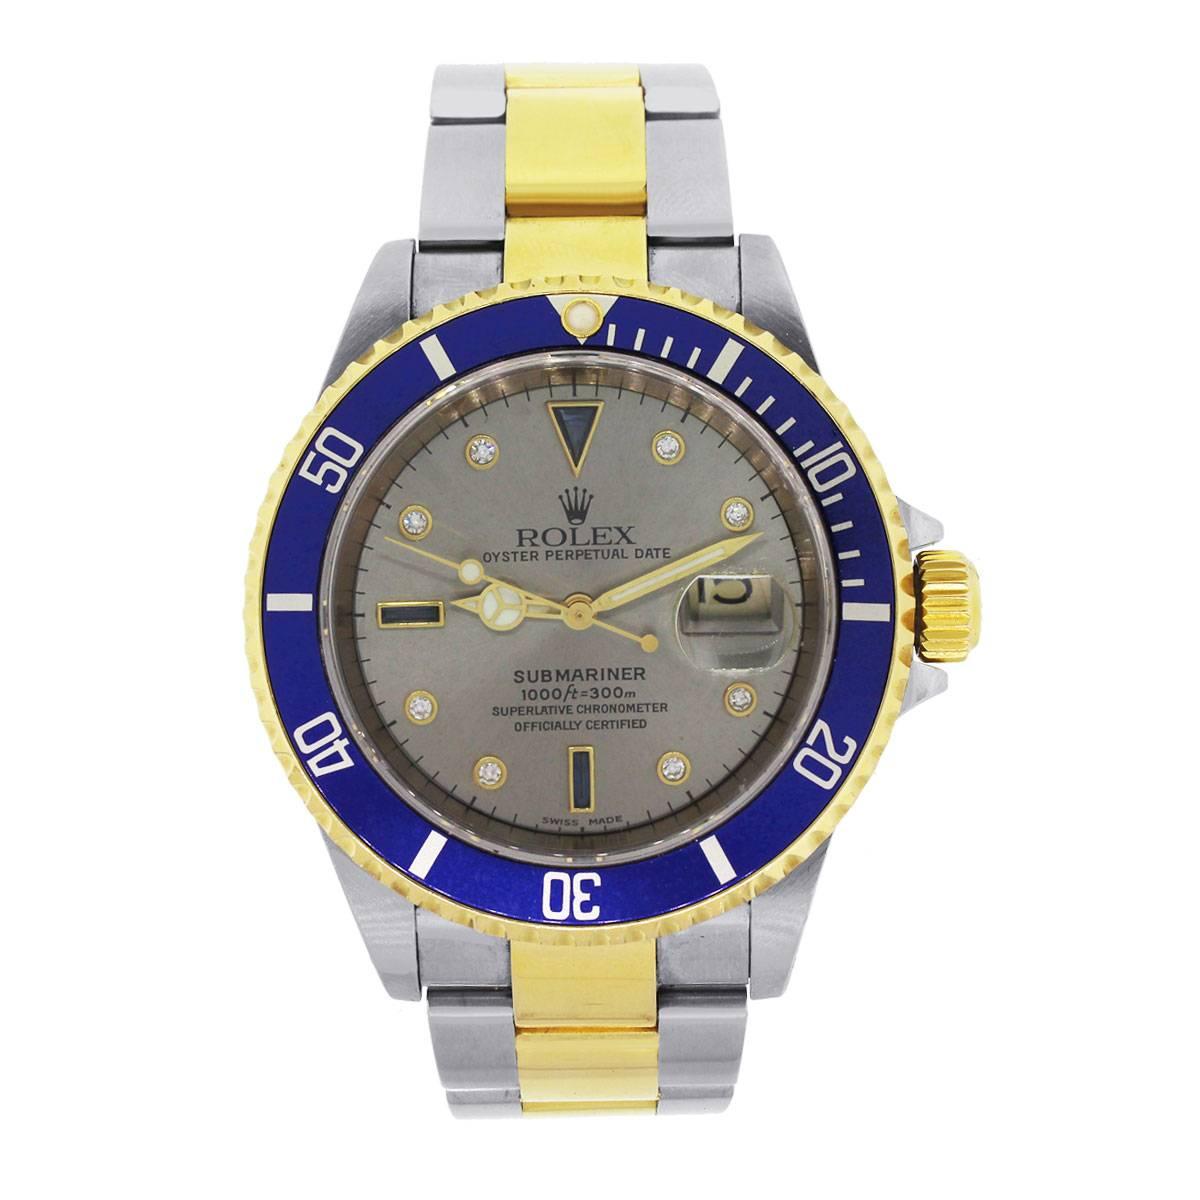 Brand: Rolex
MPN: 16613
Model: Submariner
Case Material: Two tone
Case Diameter: 40mm
Crystal :Sapphire Crystal
Bezel: Blue and yellow gold unidirectional rotating bezel
Dial: Silvered serti dial
Bracelet: Oyster two tone bracelet
Size: Will fit a